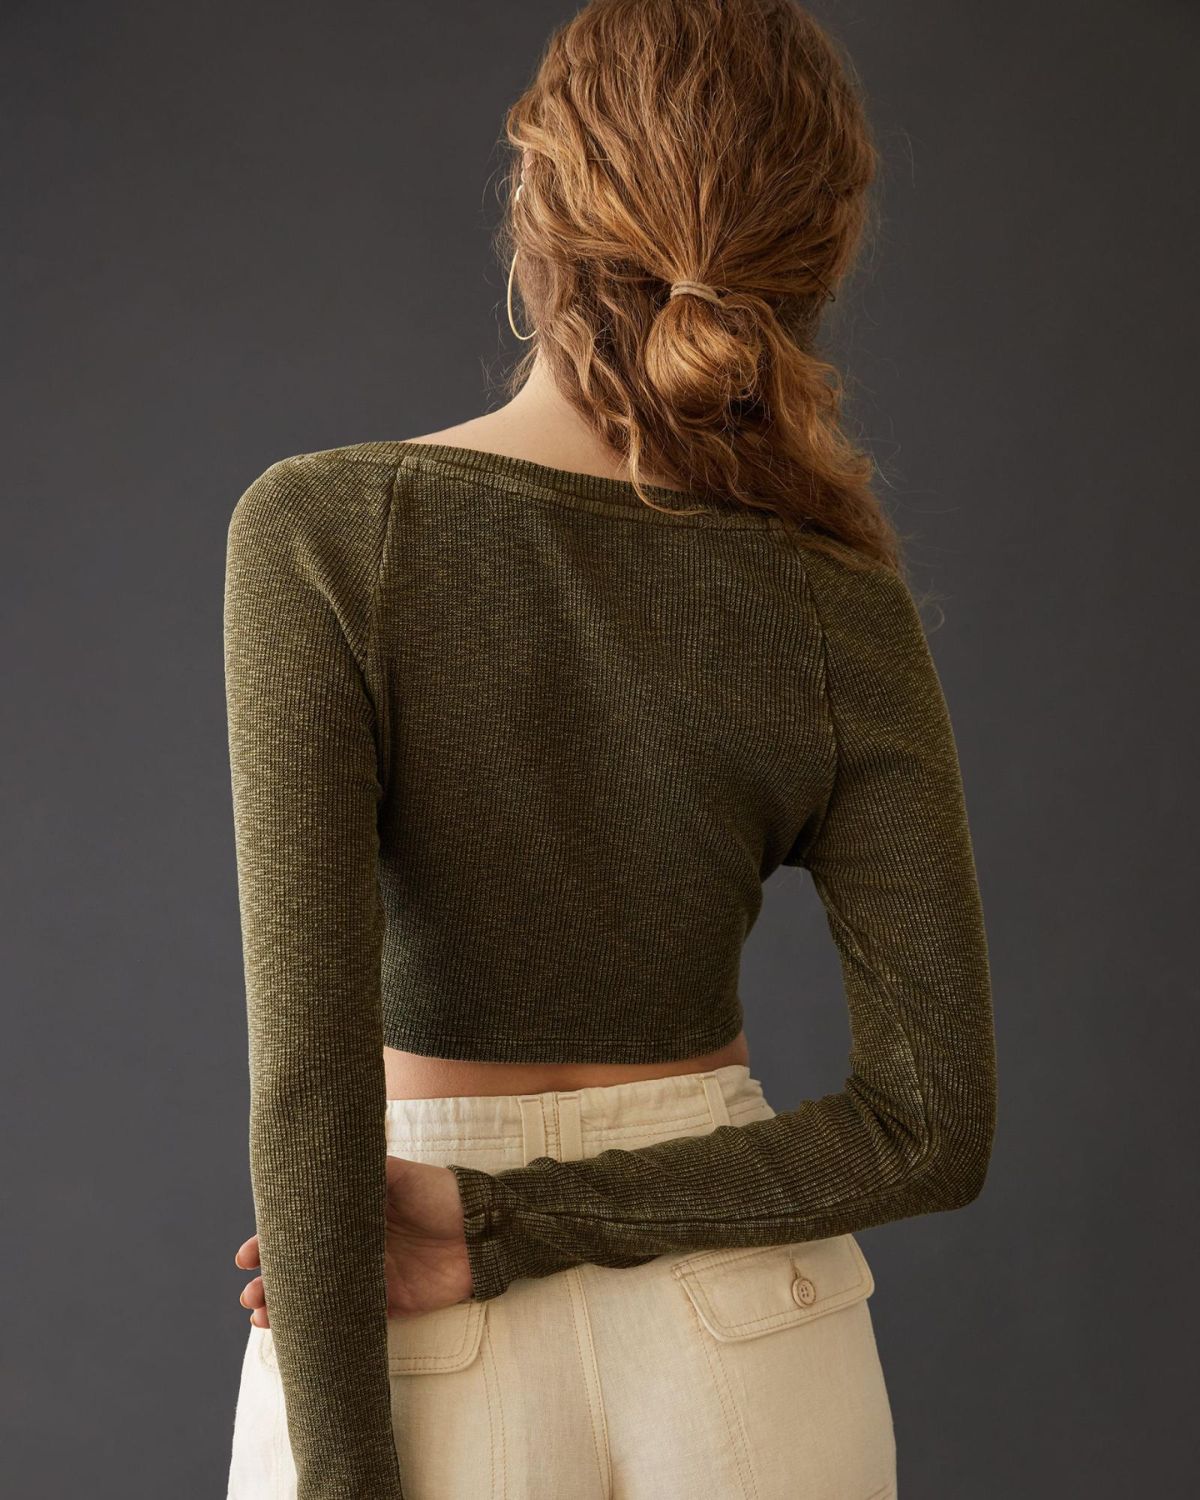 ribbed-crop-top-olive-green,RIBBED CROP TOP,Color: Olive Green
Fabric: Ribbed
Fit: Slim Fit 
Length: Crop
Neck: Scoop Neck
Sleeves: Long Sleeve
Closure: Hook & Eye
Print: Solid
Details: Washed fabric effect,topwear,tops,casual,streetwear,knitted, stretchable,ribbed,olive green,solid,hook,slim fit,crop,crop,asymmetric,scoop neck,long sleeves